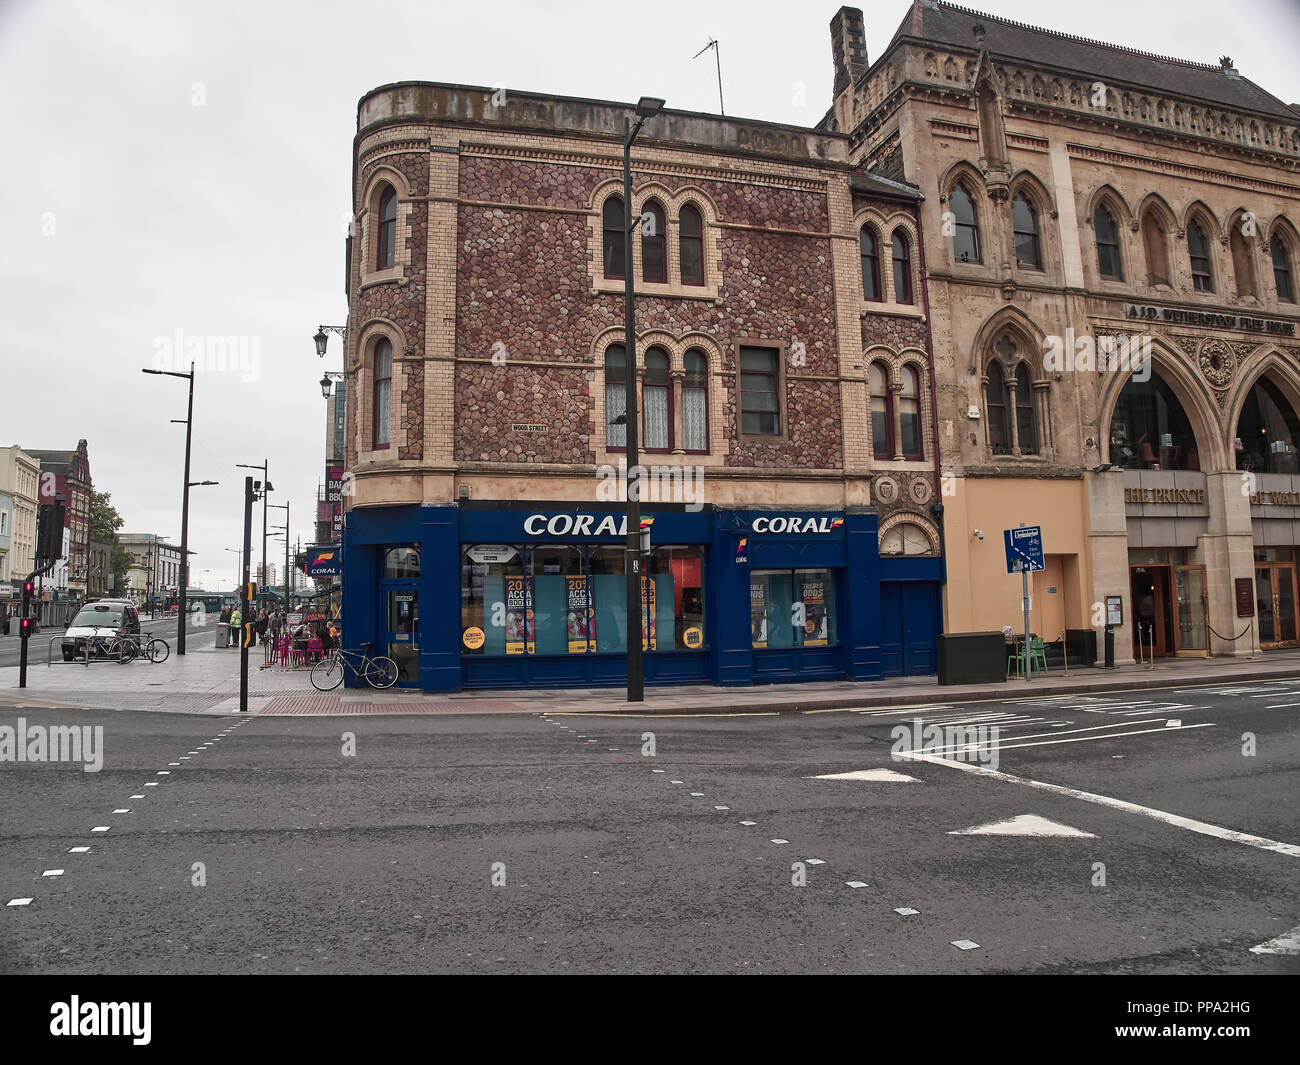 Cardiff, United Kingdom - Semptember 16, 2018: View of Cardiff city streets Stock Photo